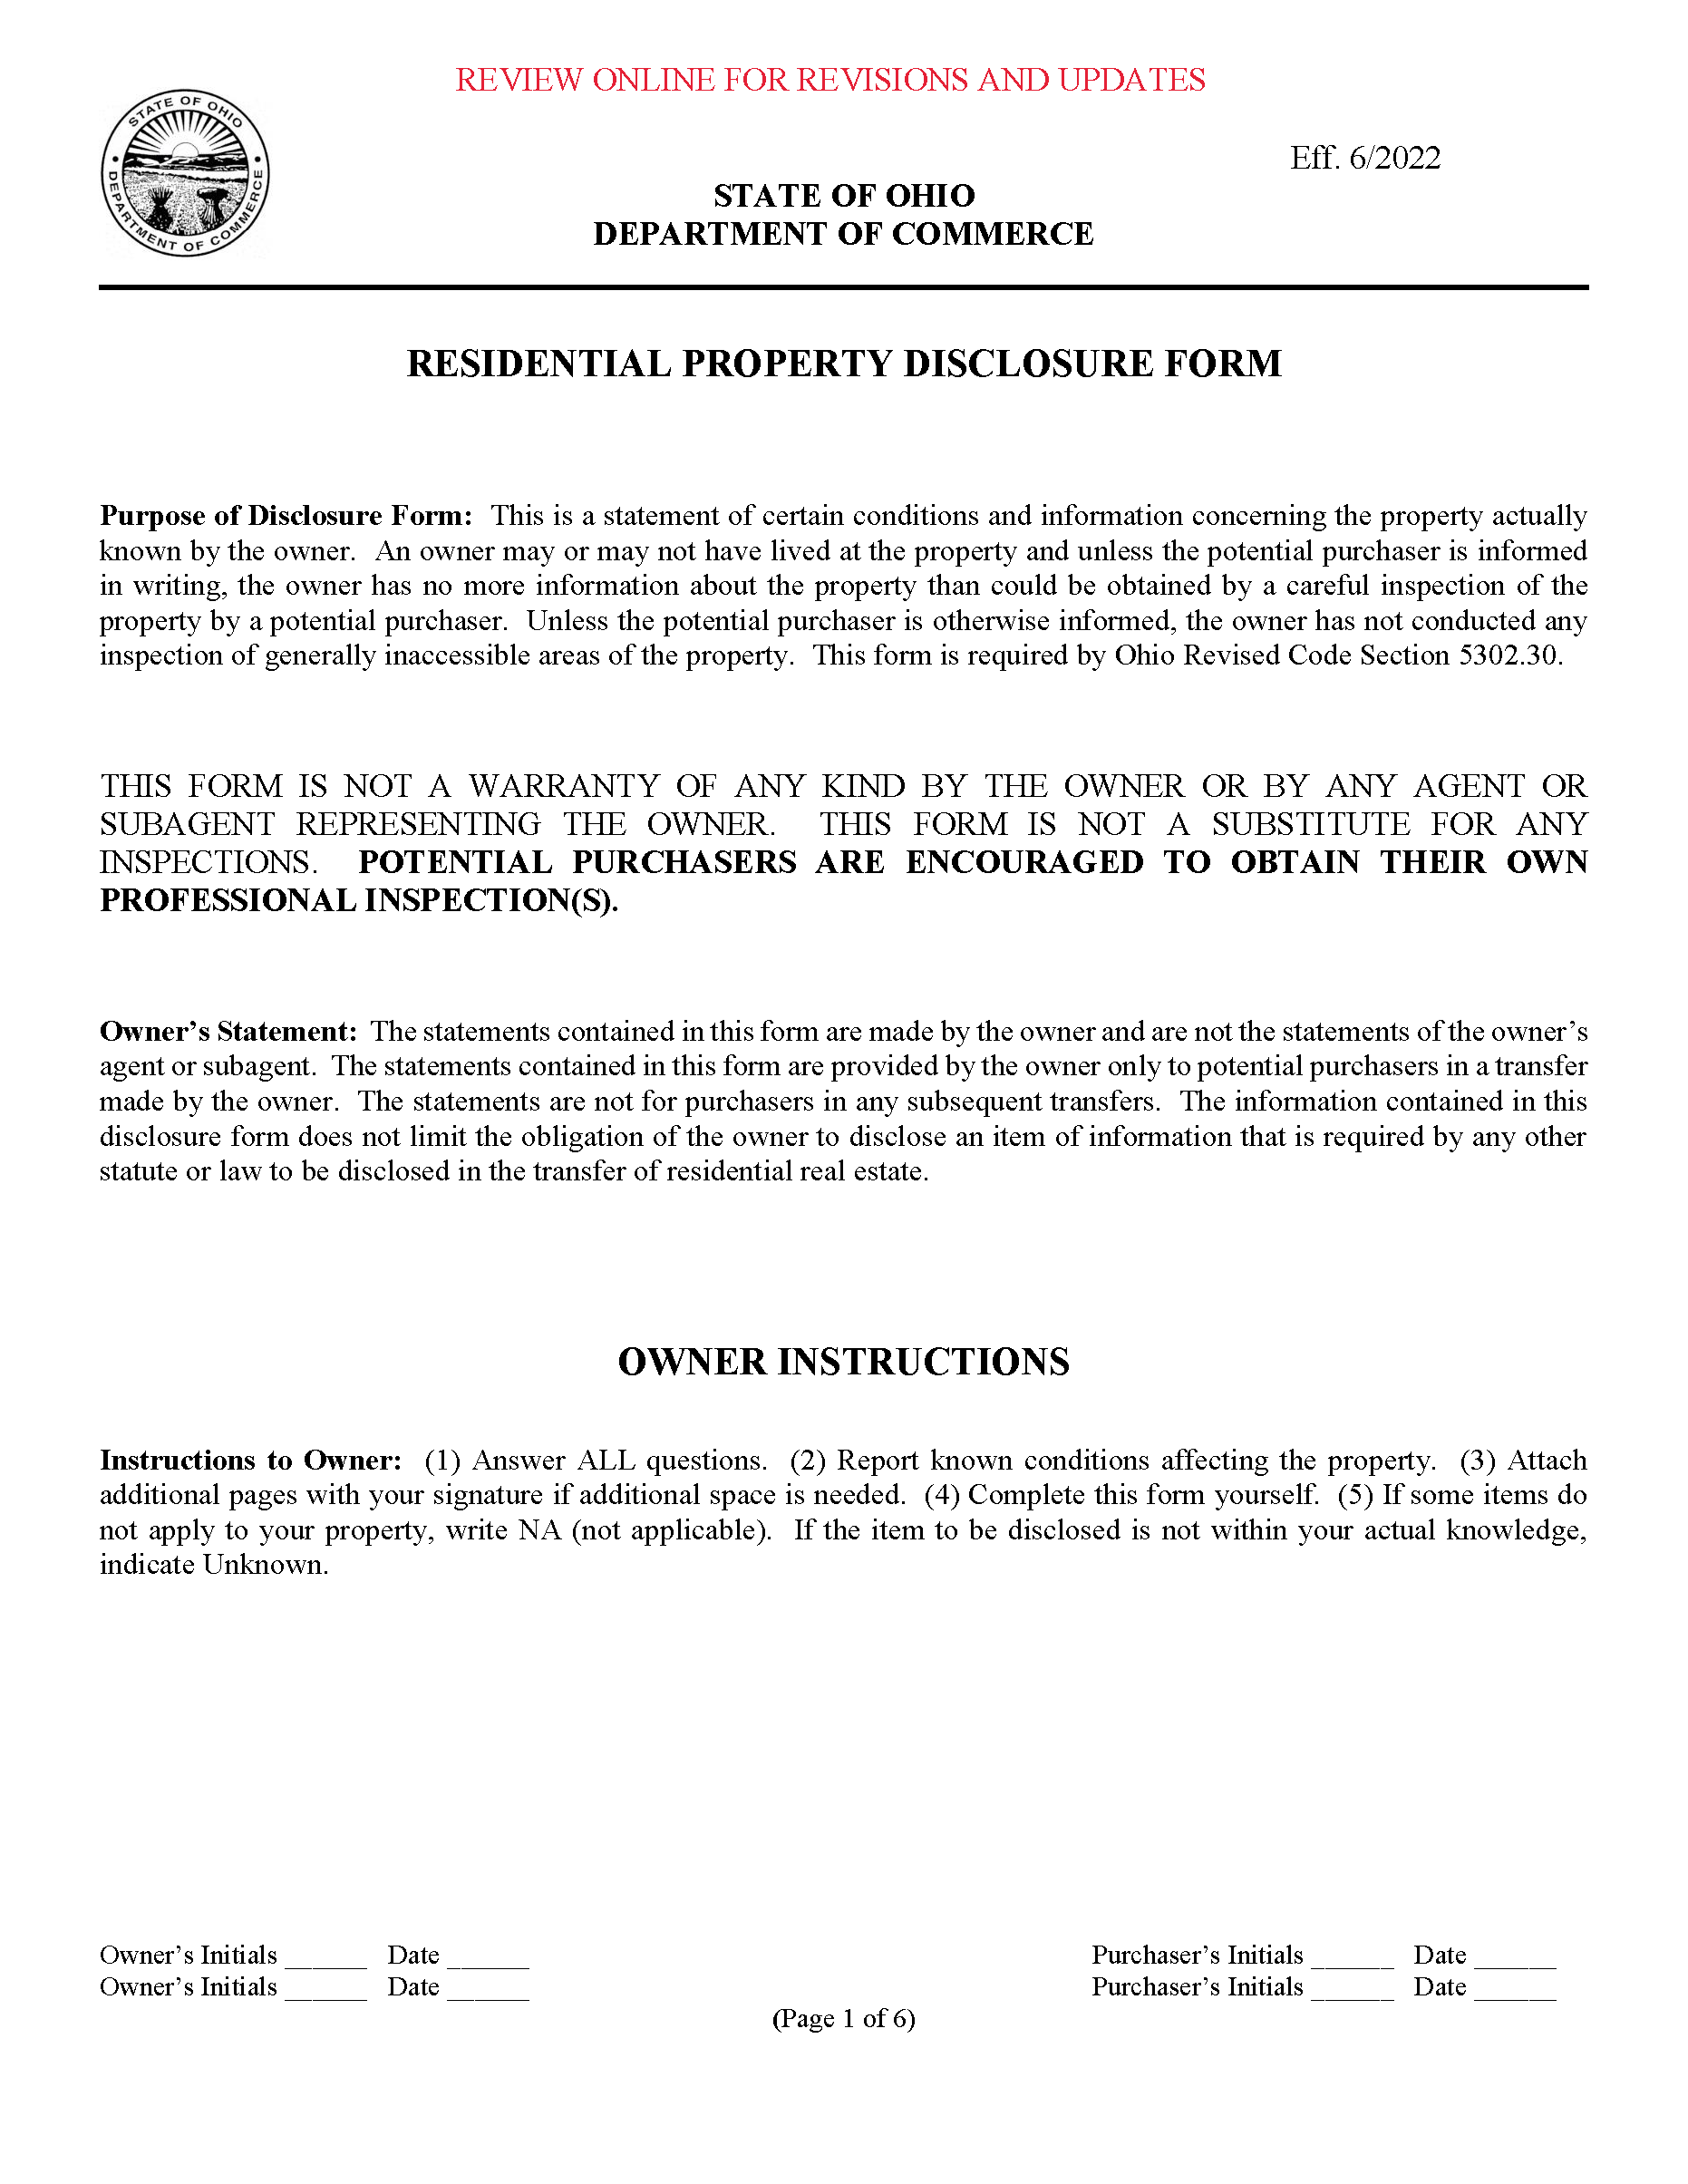 Jackson County Residential Property Disclosure 